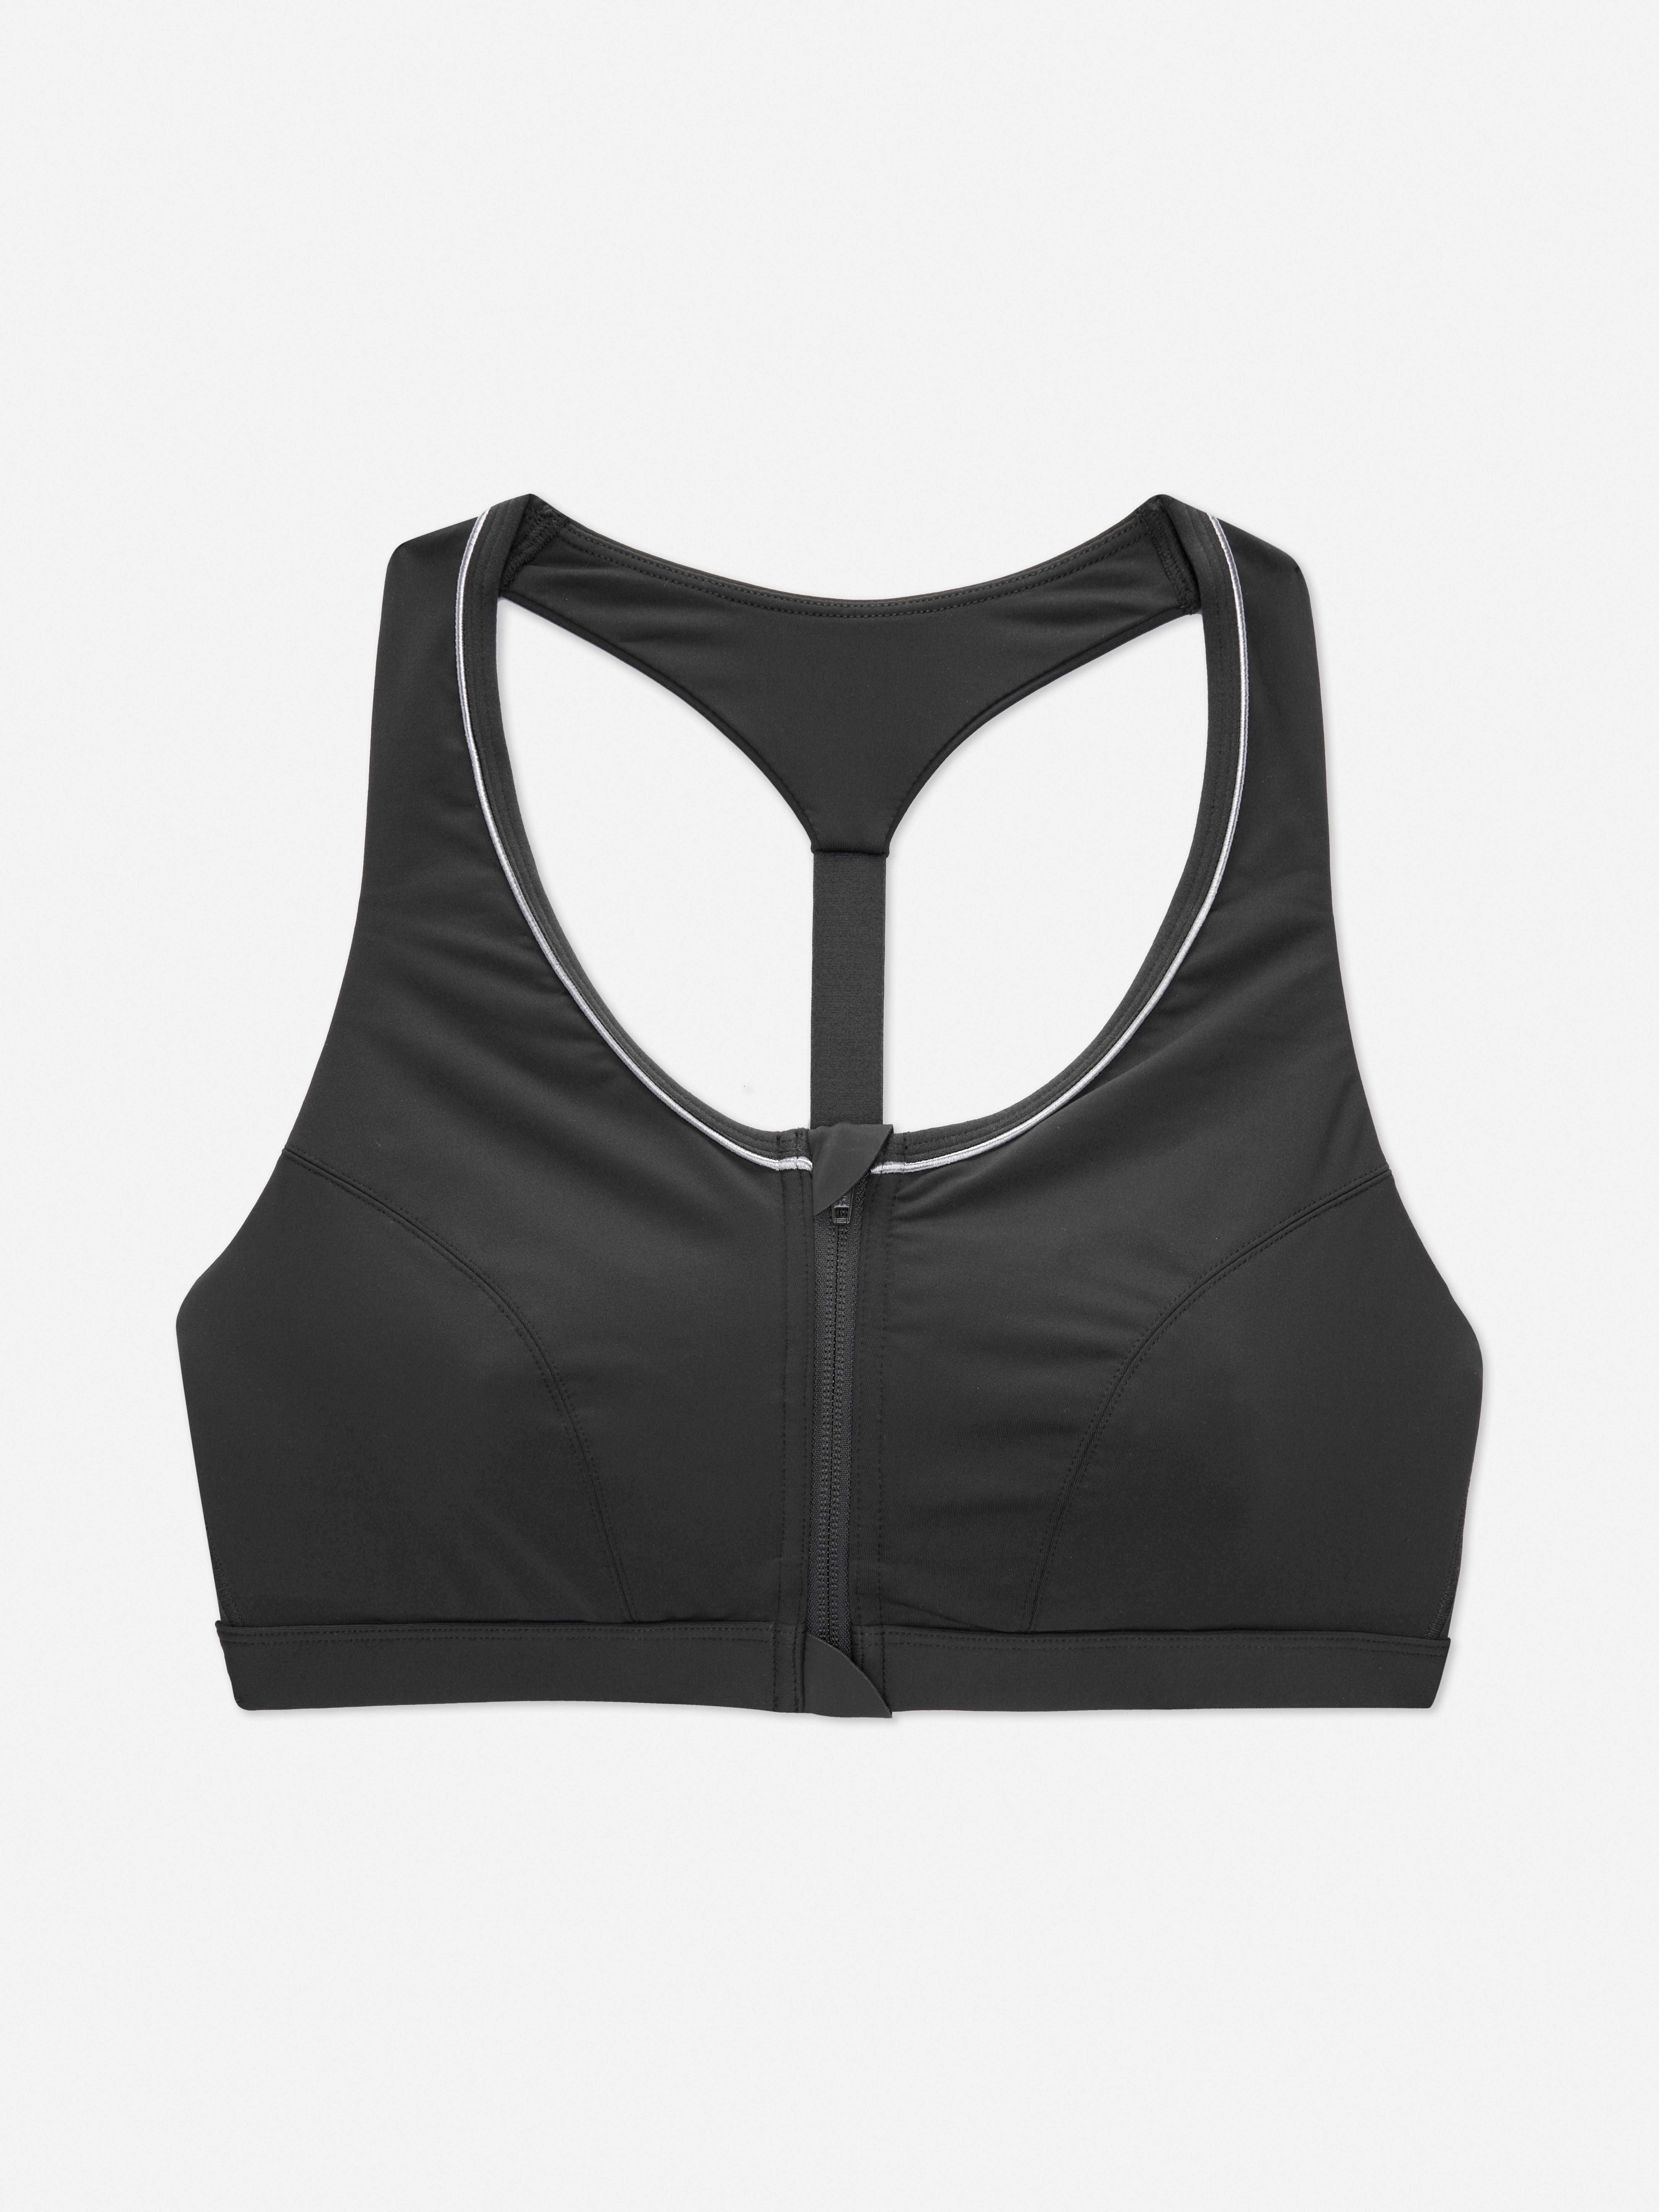 Grey Sport Bra from Primark on 21 Buttons